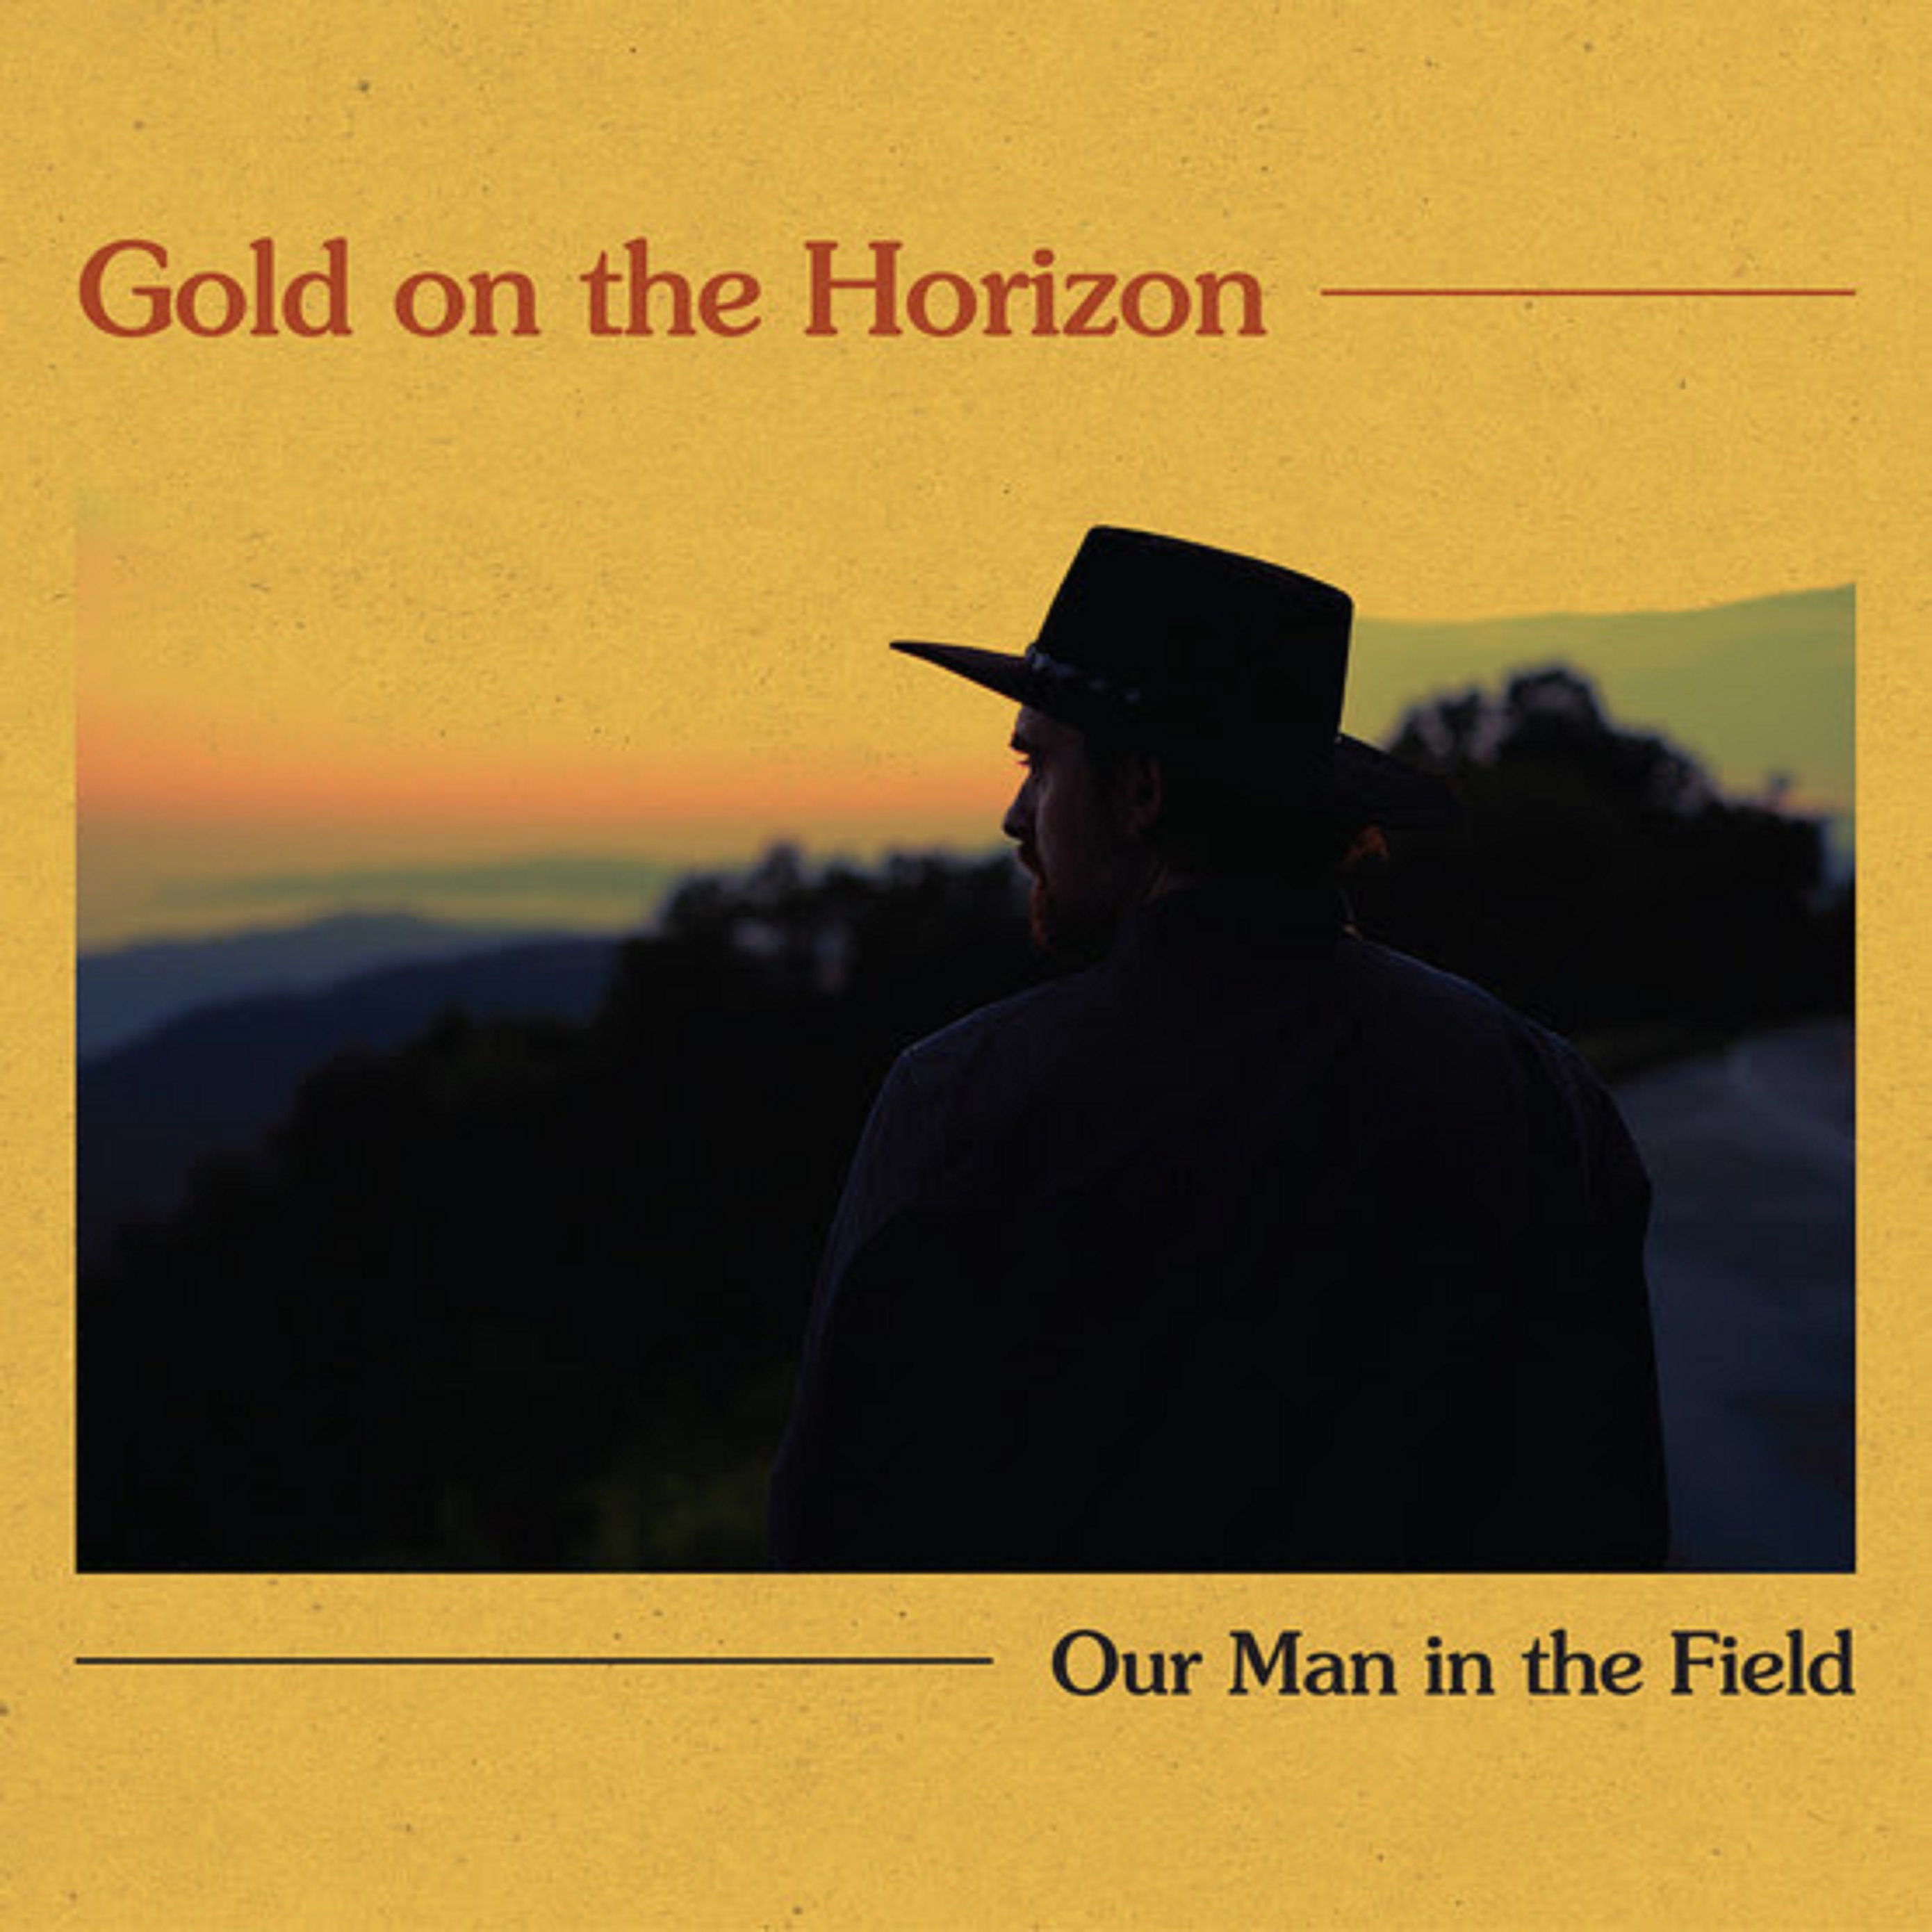 BRITISH SINGER-SONGWRITER OUR MAN IN THE FIELD RELEASES NEW ALBUM GOLD ON THE HORIZON